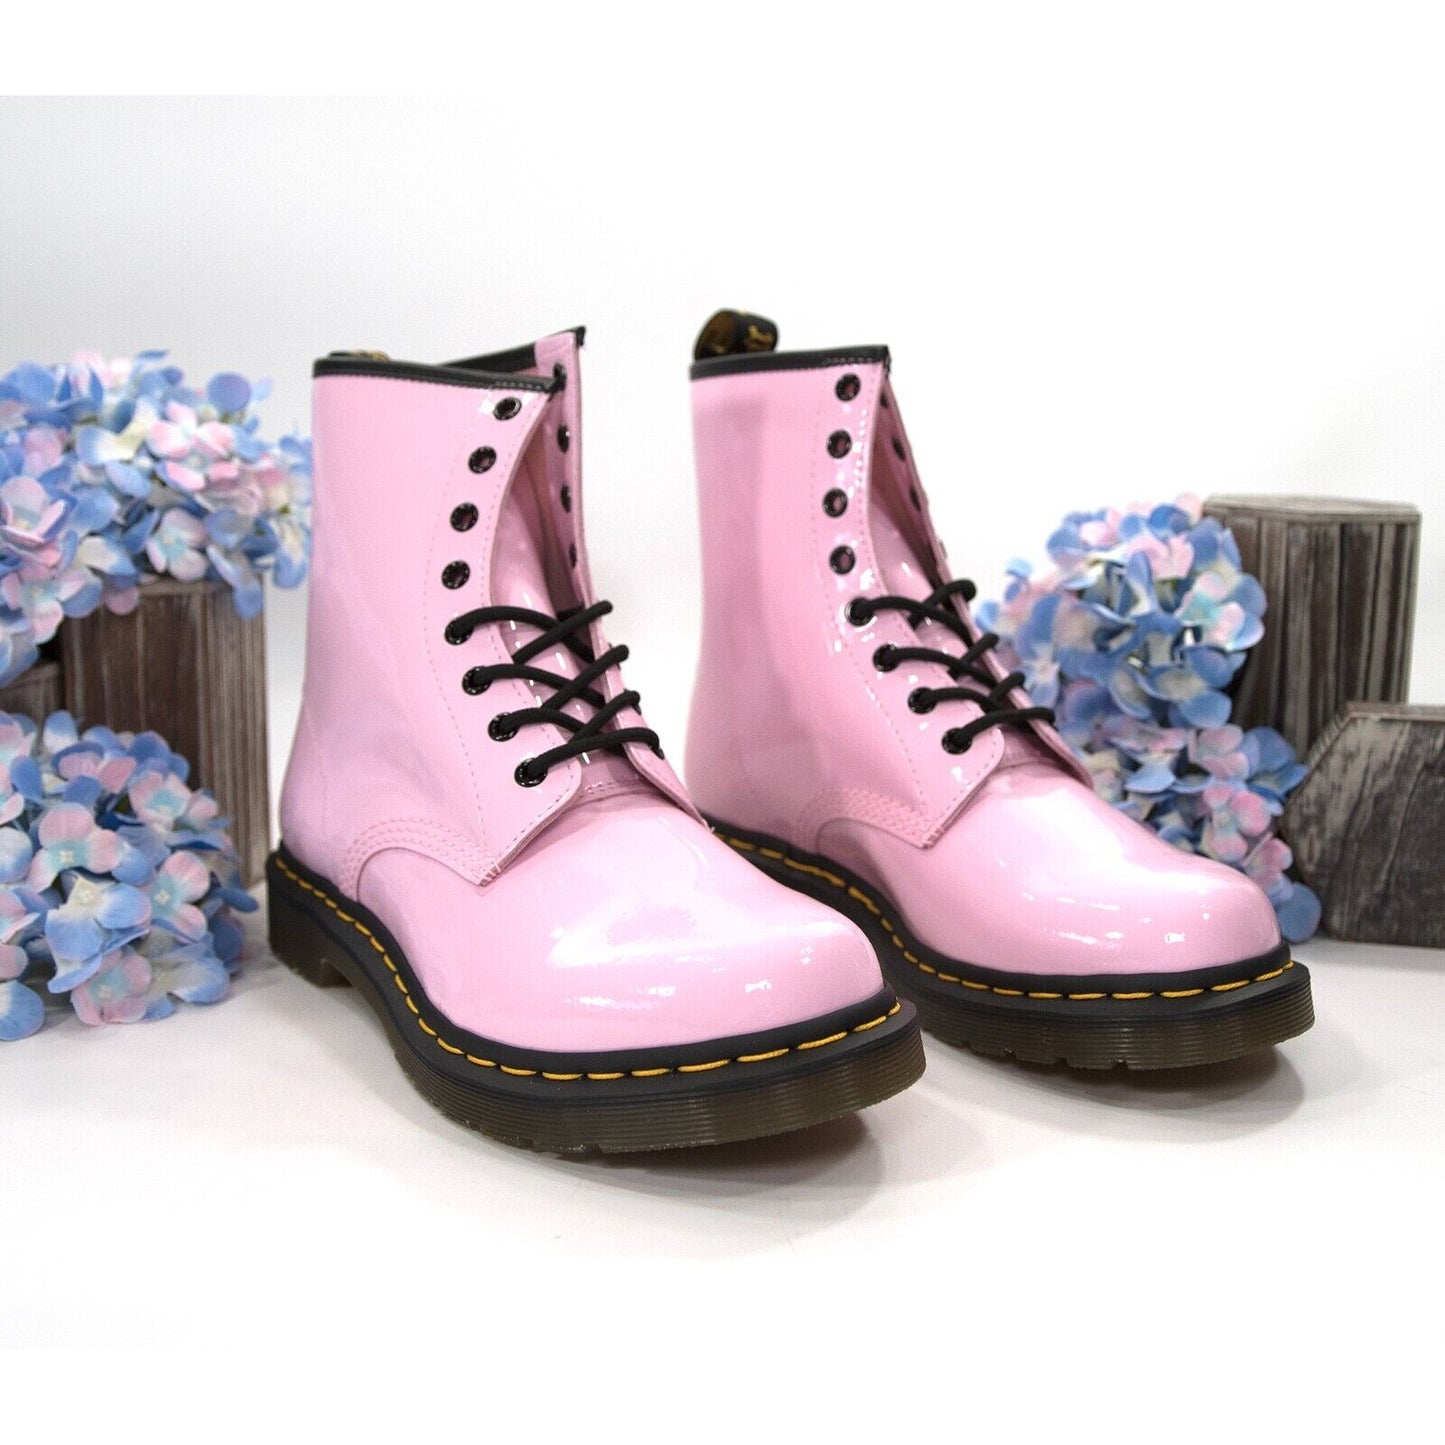 Dr. Martens 1460 Pink Patent Leather Lamper Lace Up Boots Size 10 NIB